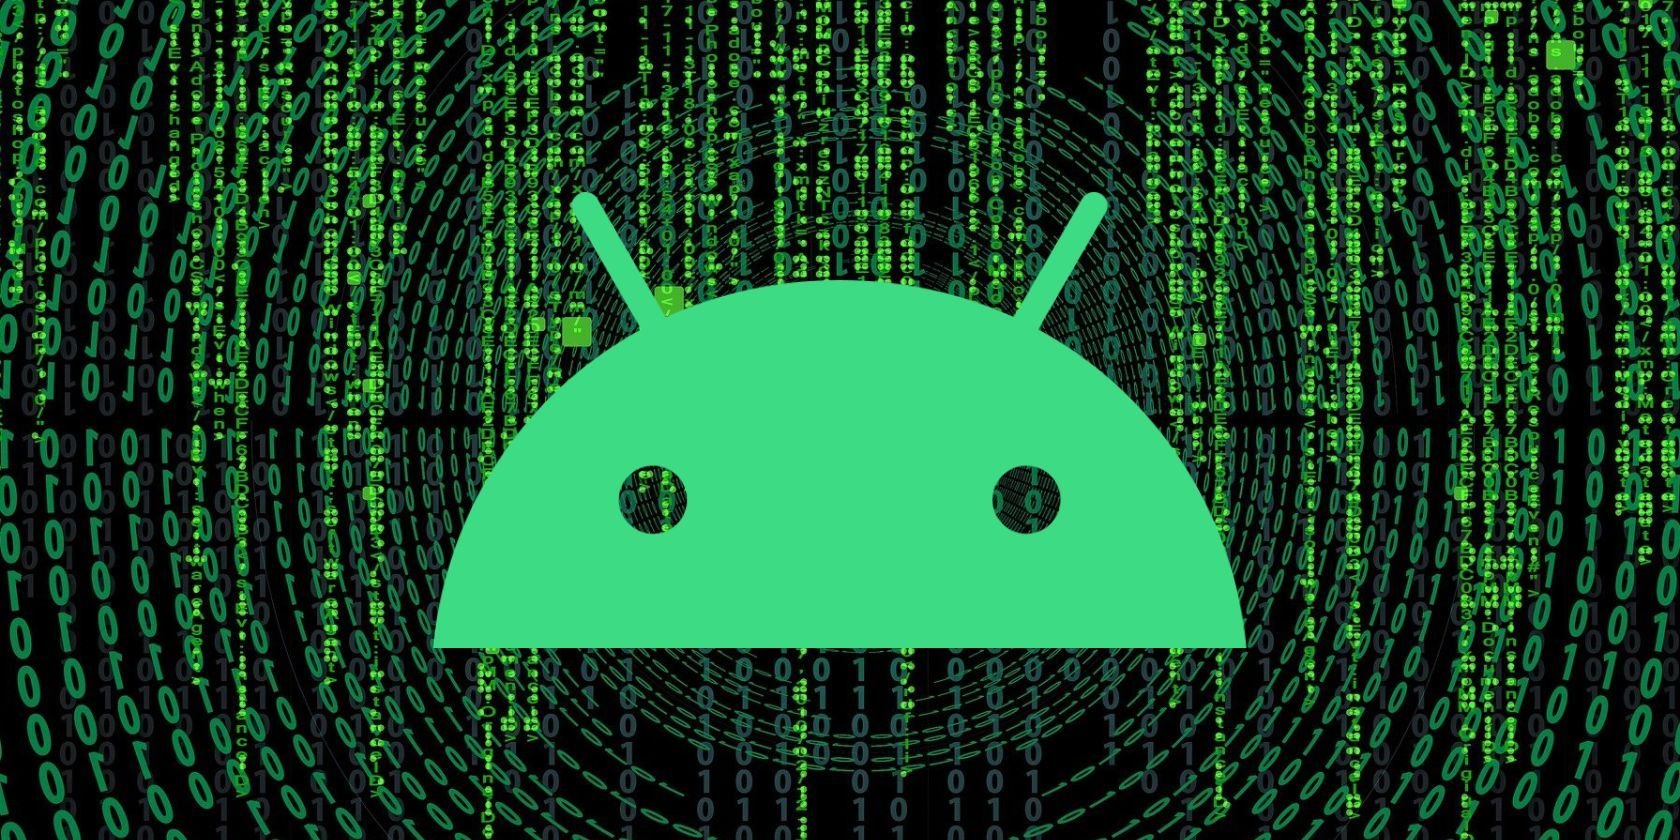 New "RatMilad" Android Malware Can Steal Data and Spy on Victims